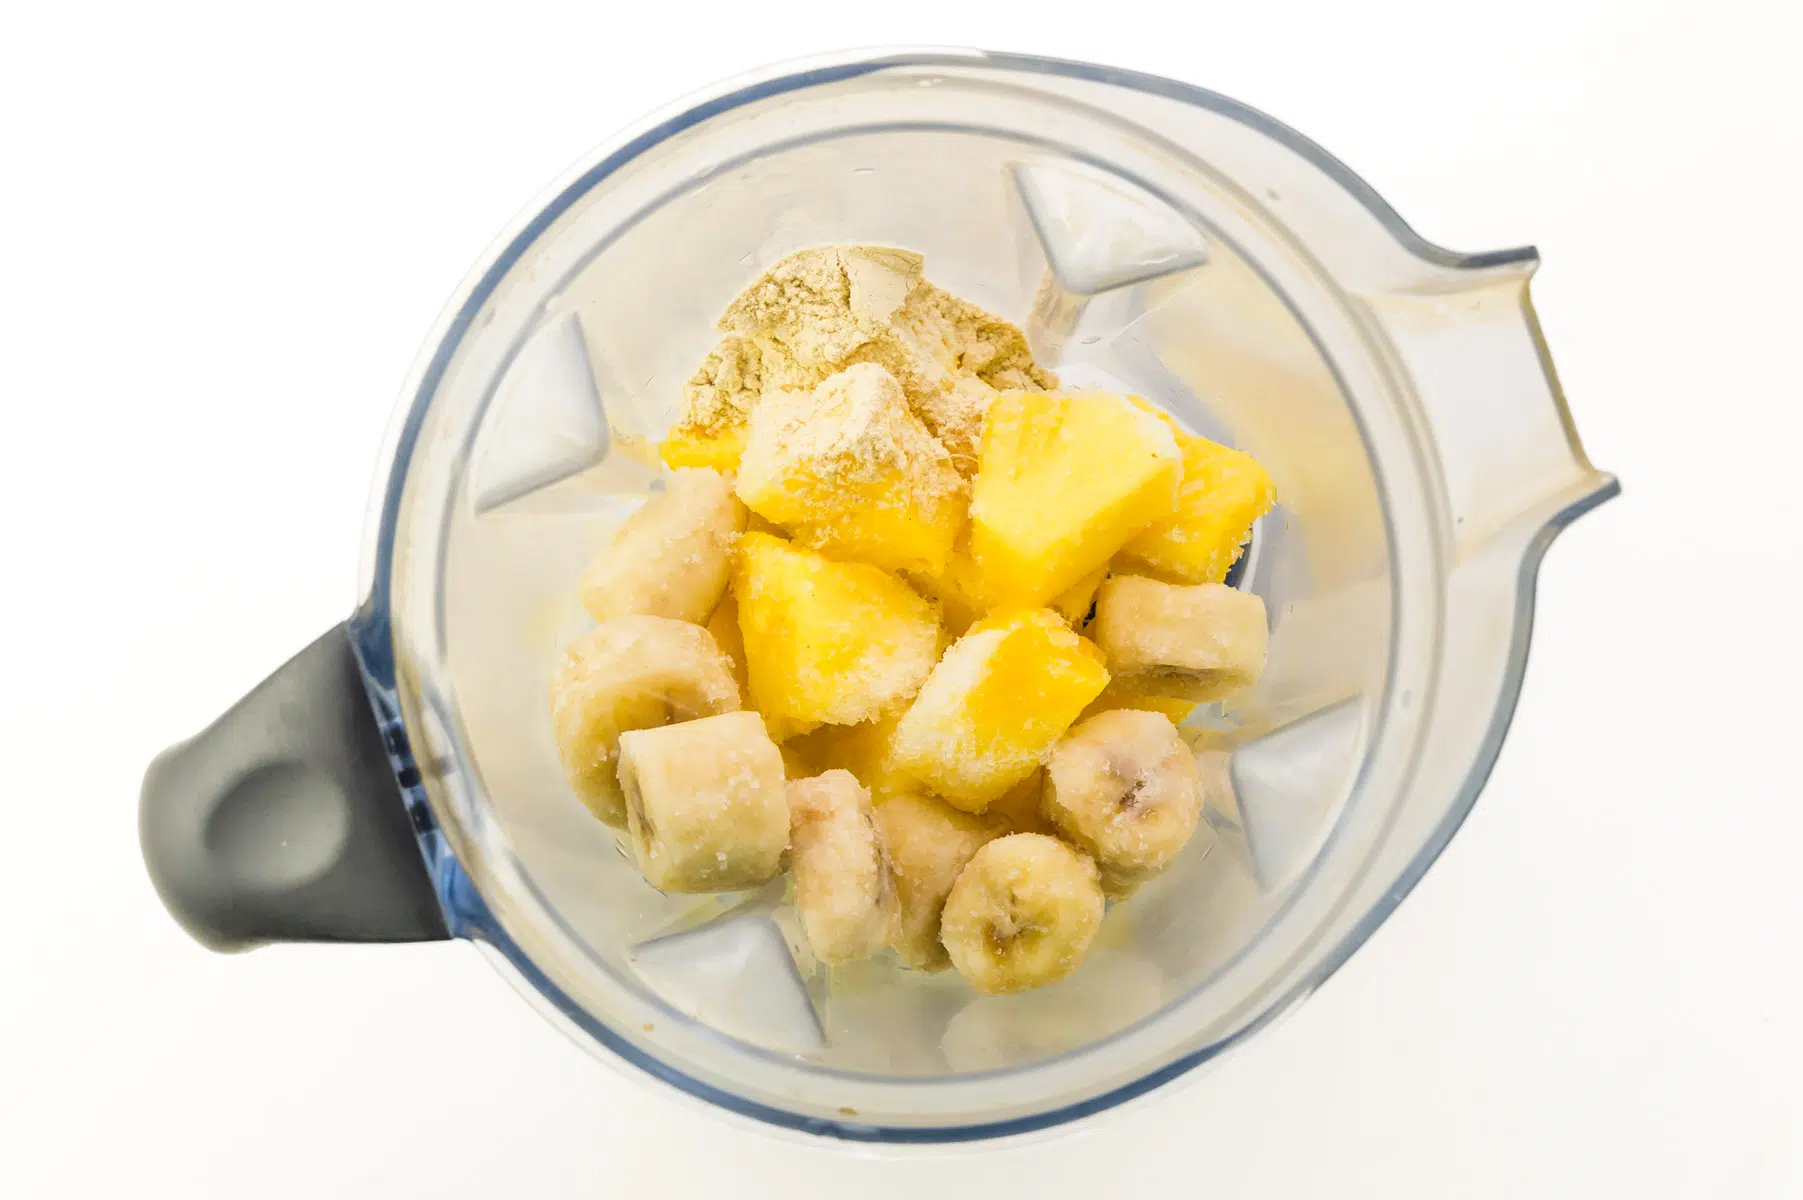 Frozen pineapple and banana chunks are in a blender jar.